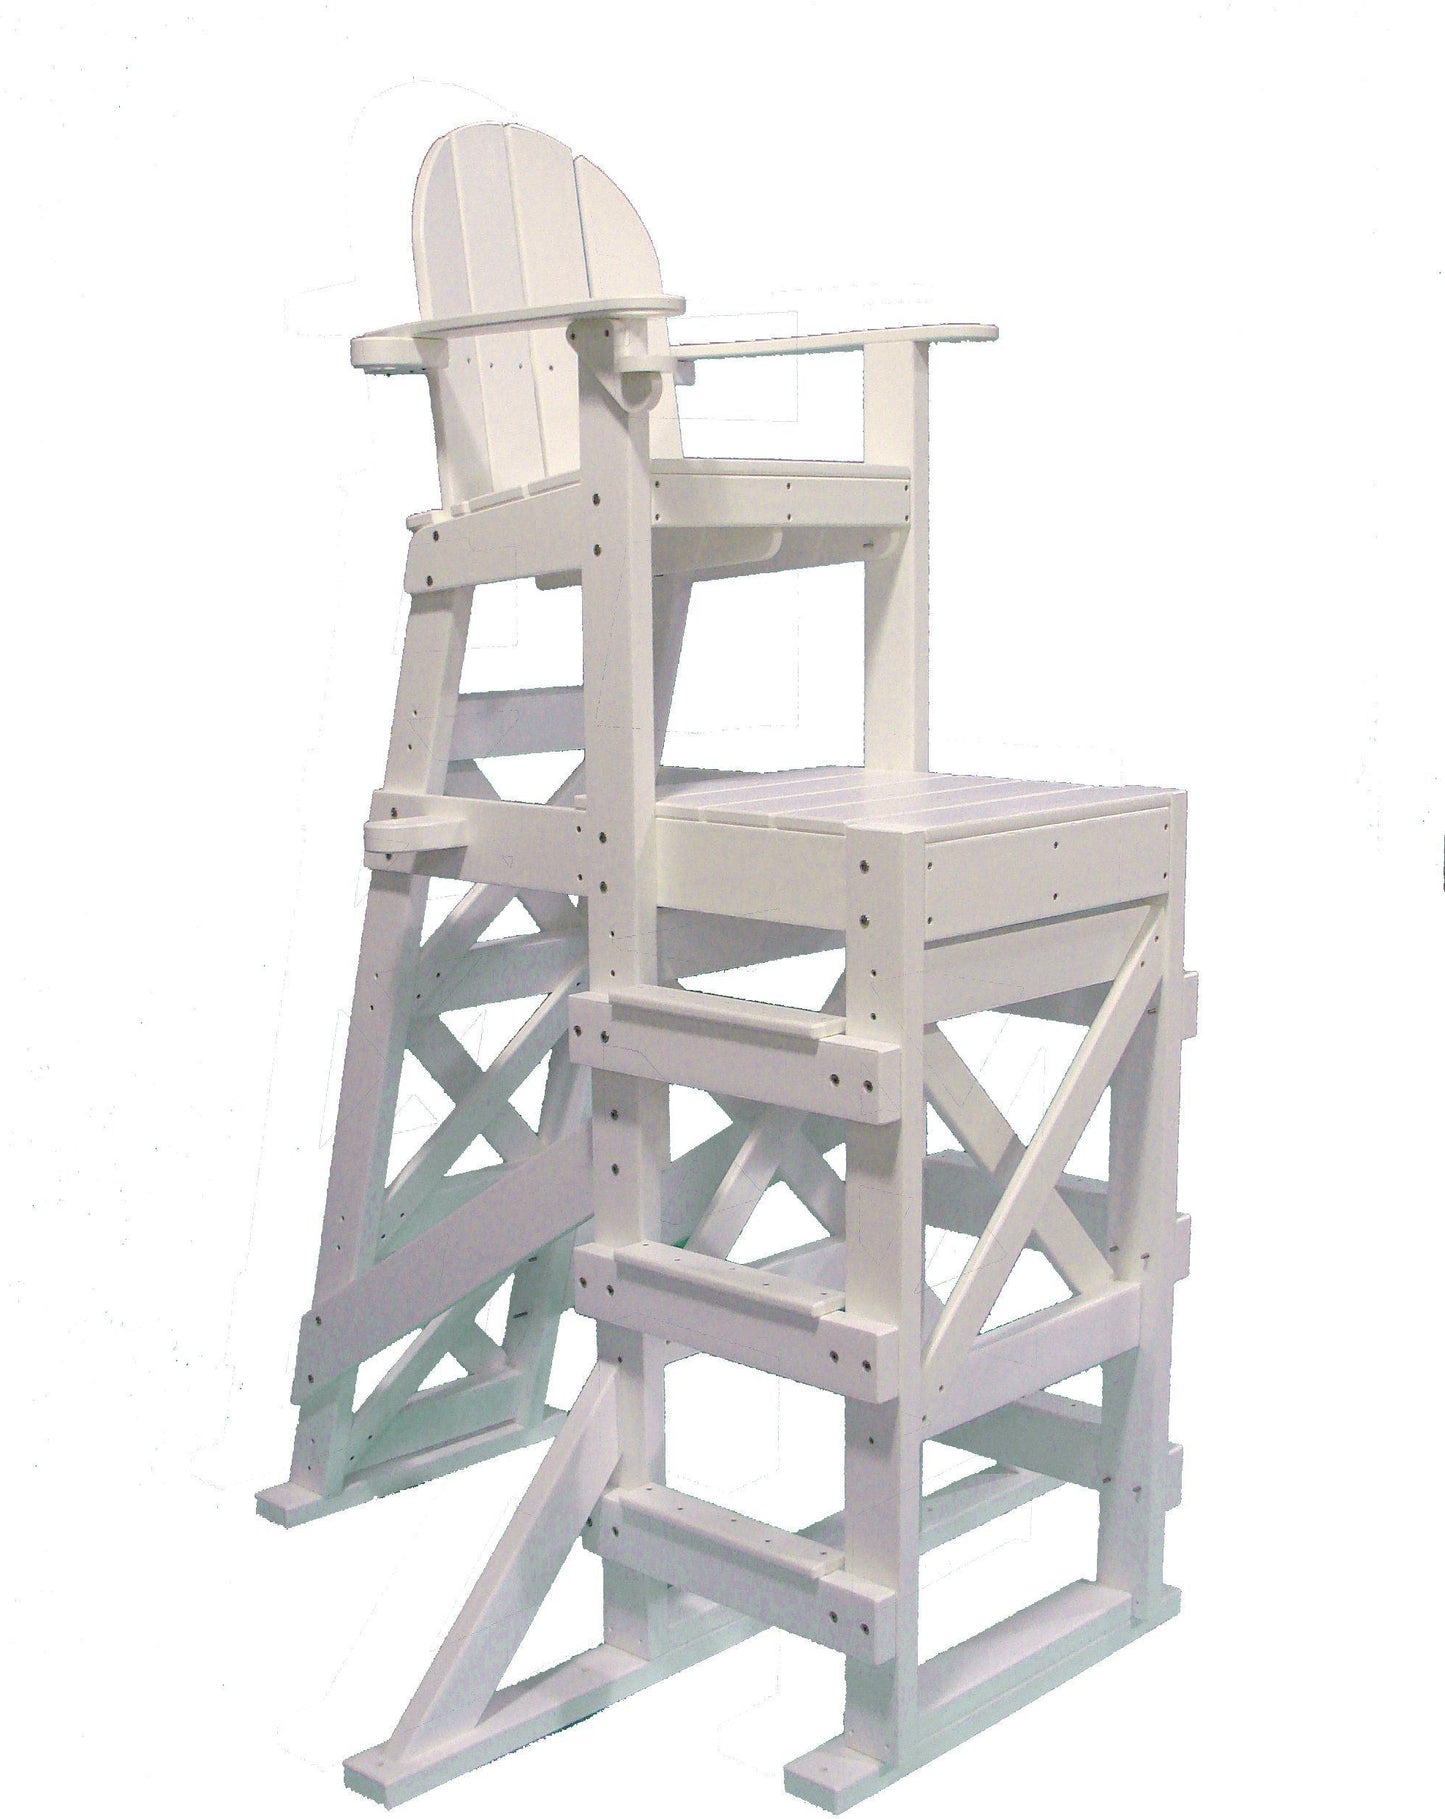 Tailwind Furniture Recycled Plastic TLG-530 Tall Lifeguard Chair with Side Steps - Seat Height: 64" - LEAD TIME TO SHIP 10 TO 12 BUSINESS DAYS